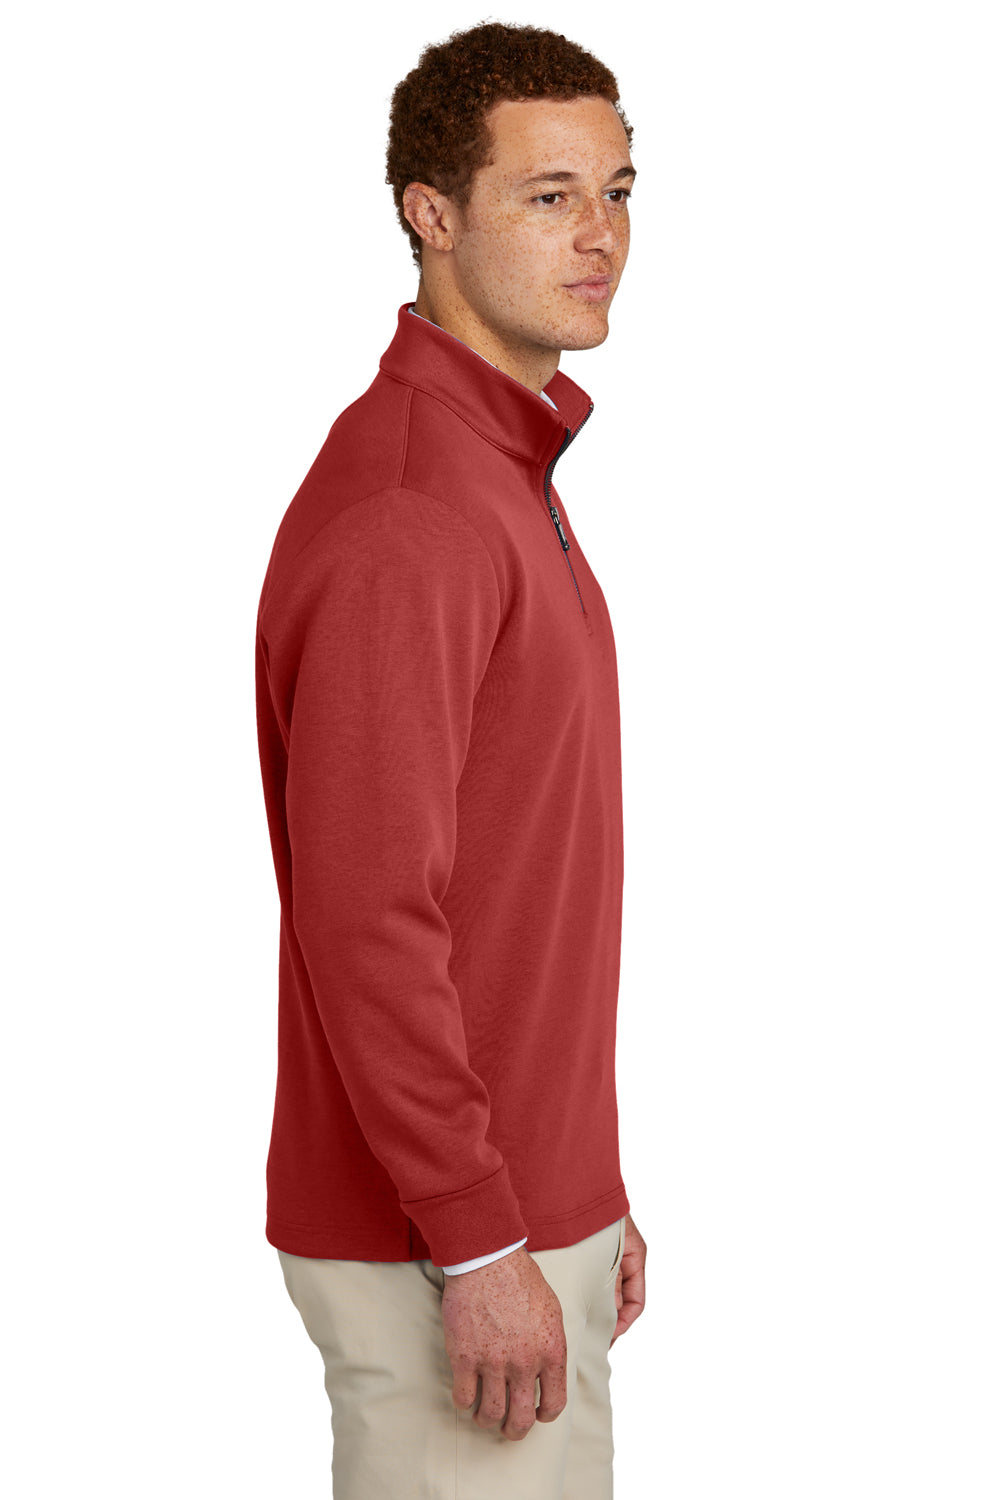 Brooks Brothers Mens Double Knit 1/4 Zip Sweatshirt Rich Red Model Side